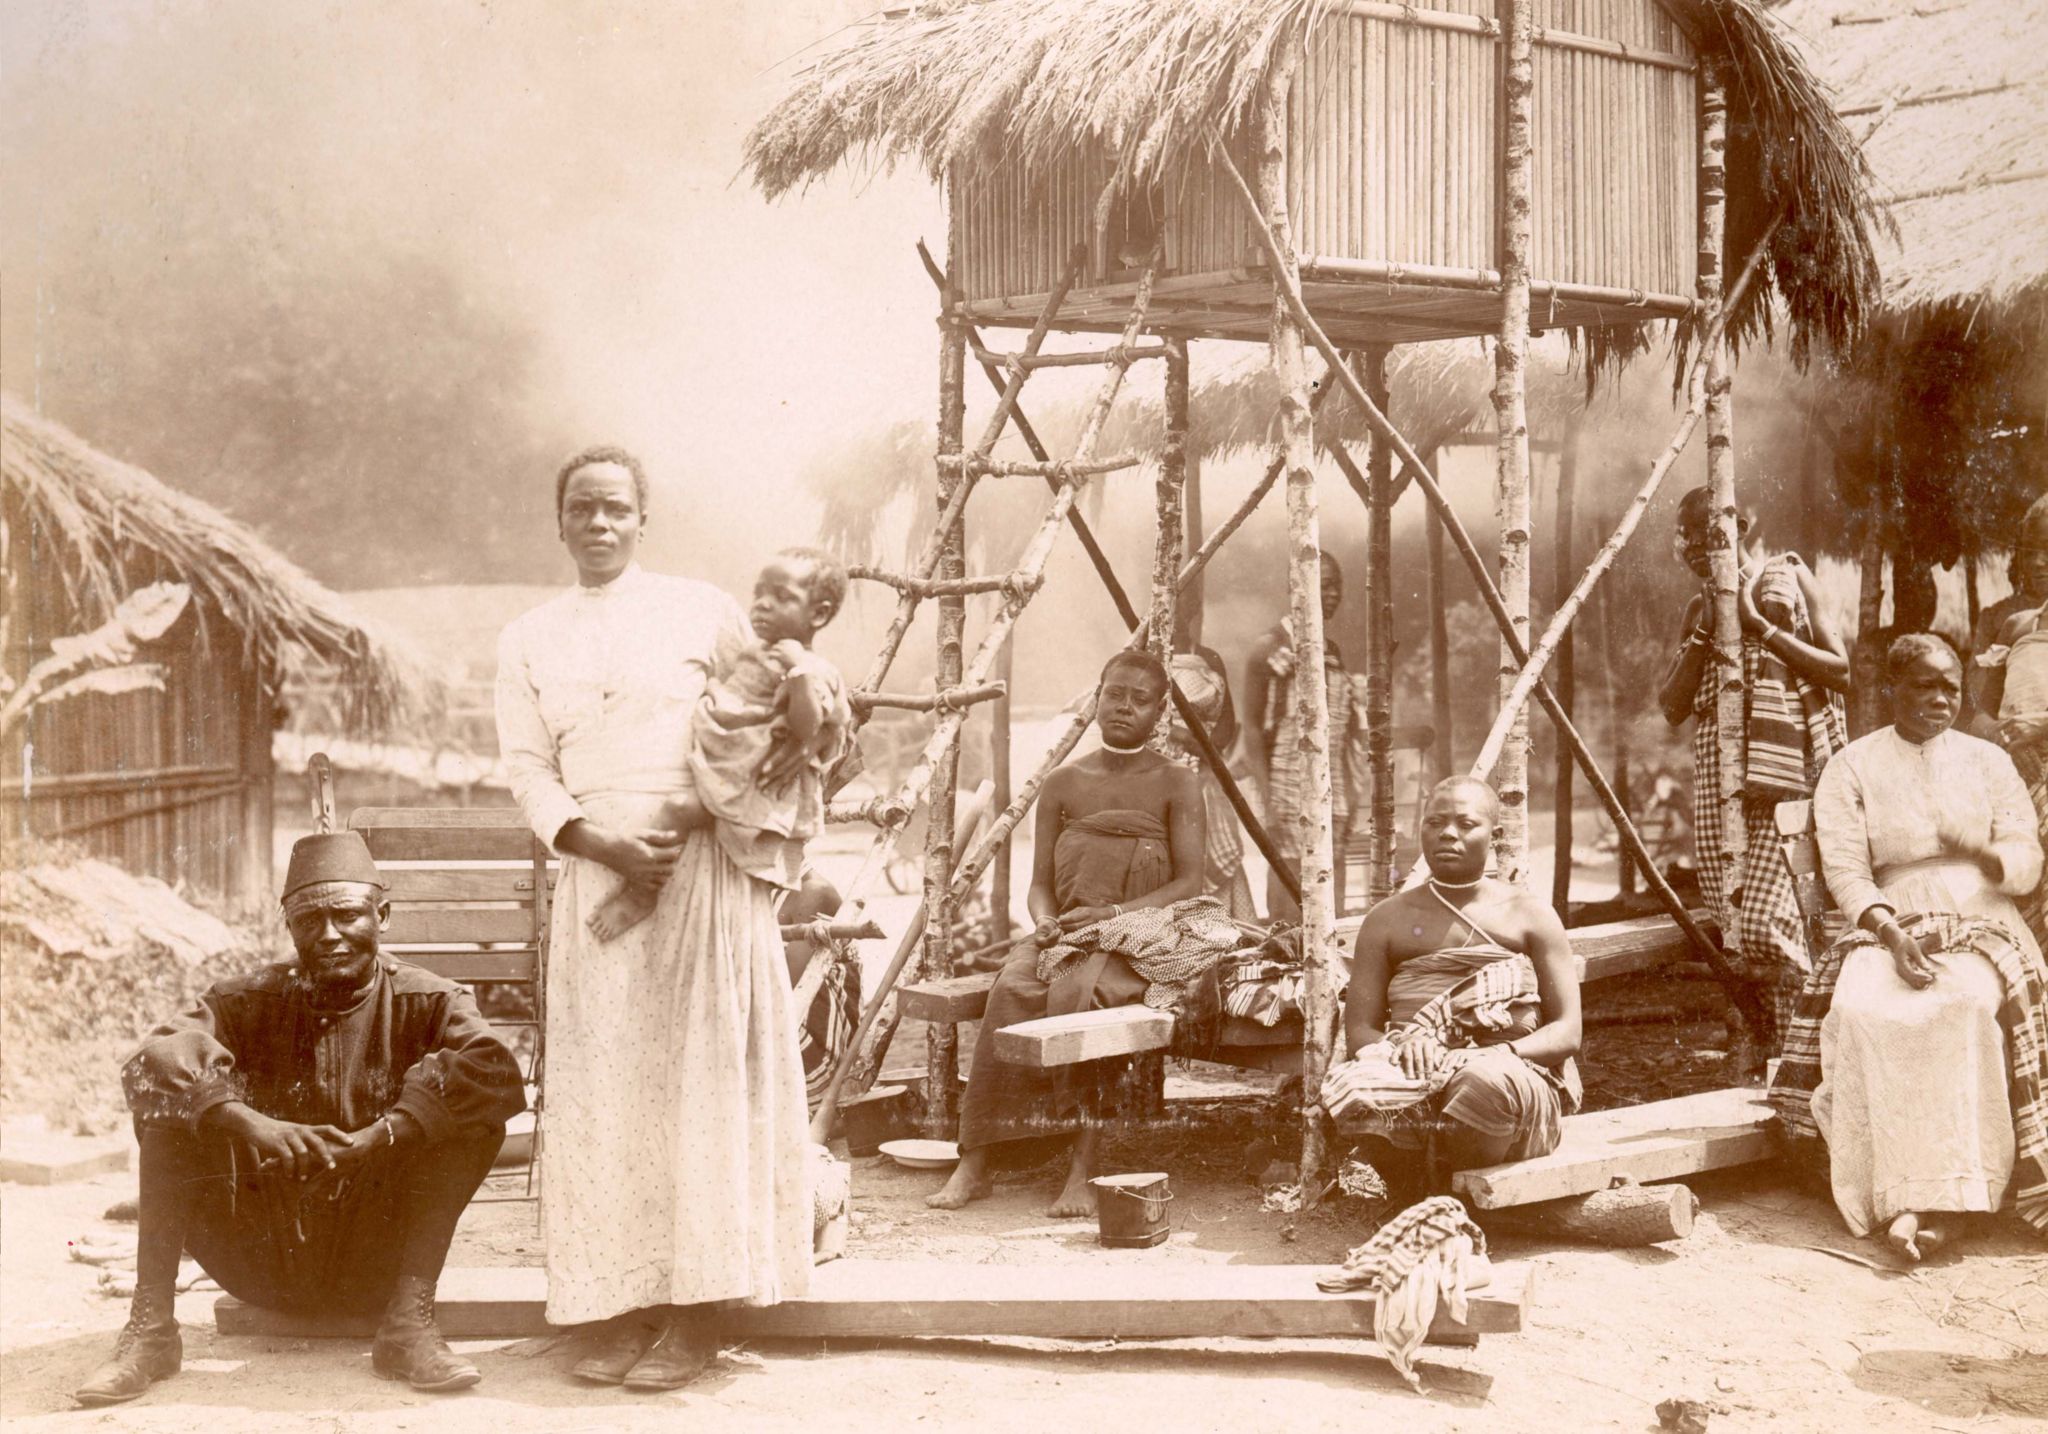 Congolese people were forced to be human exhibits in a "zoo" in Belgium in 1897